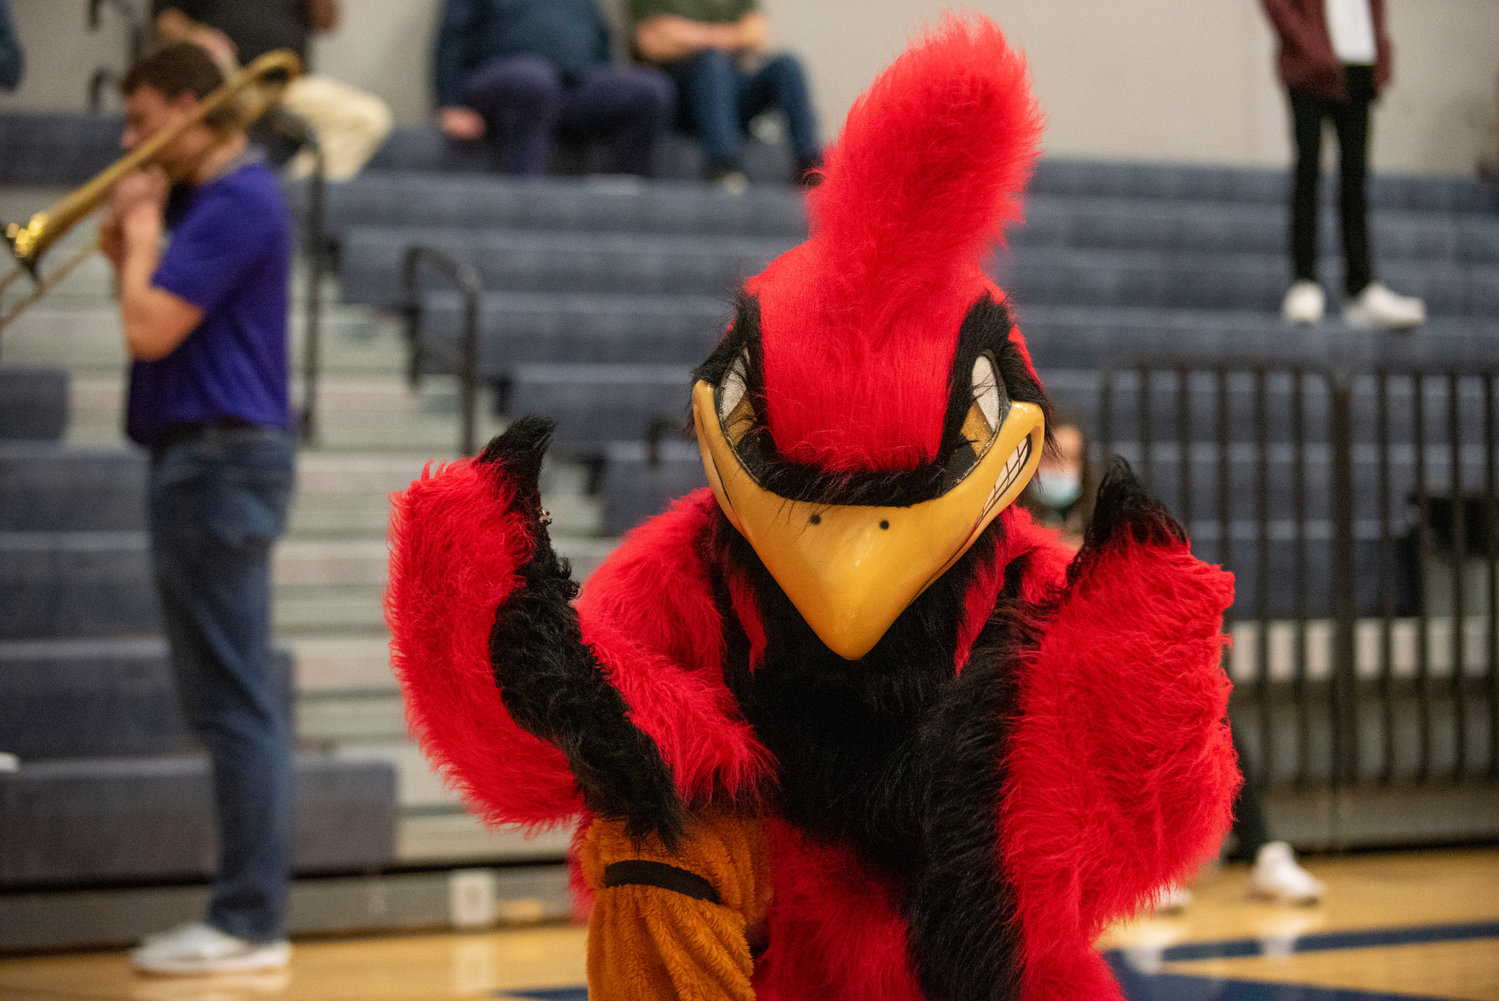 The Winlock Cardinal poses for a photo during halftime of a girls basketball playoff game between Winlock and Morton-White Pass on Feb. 8.